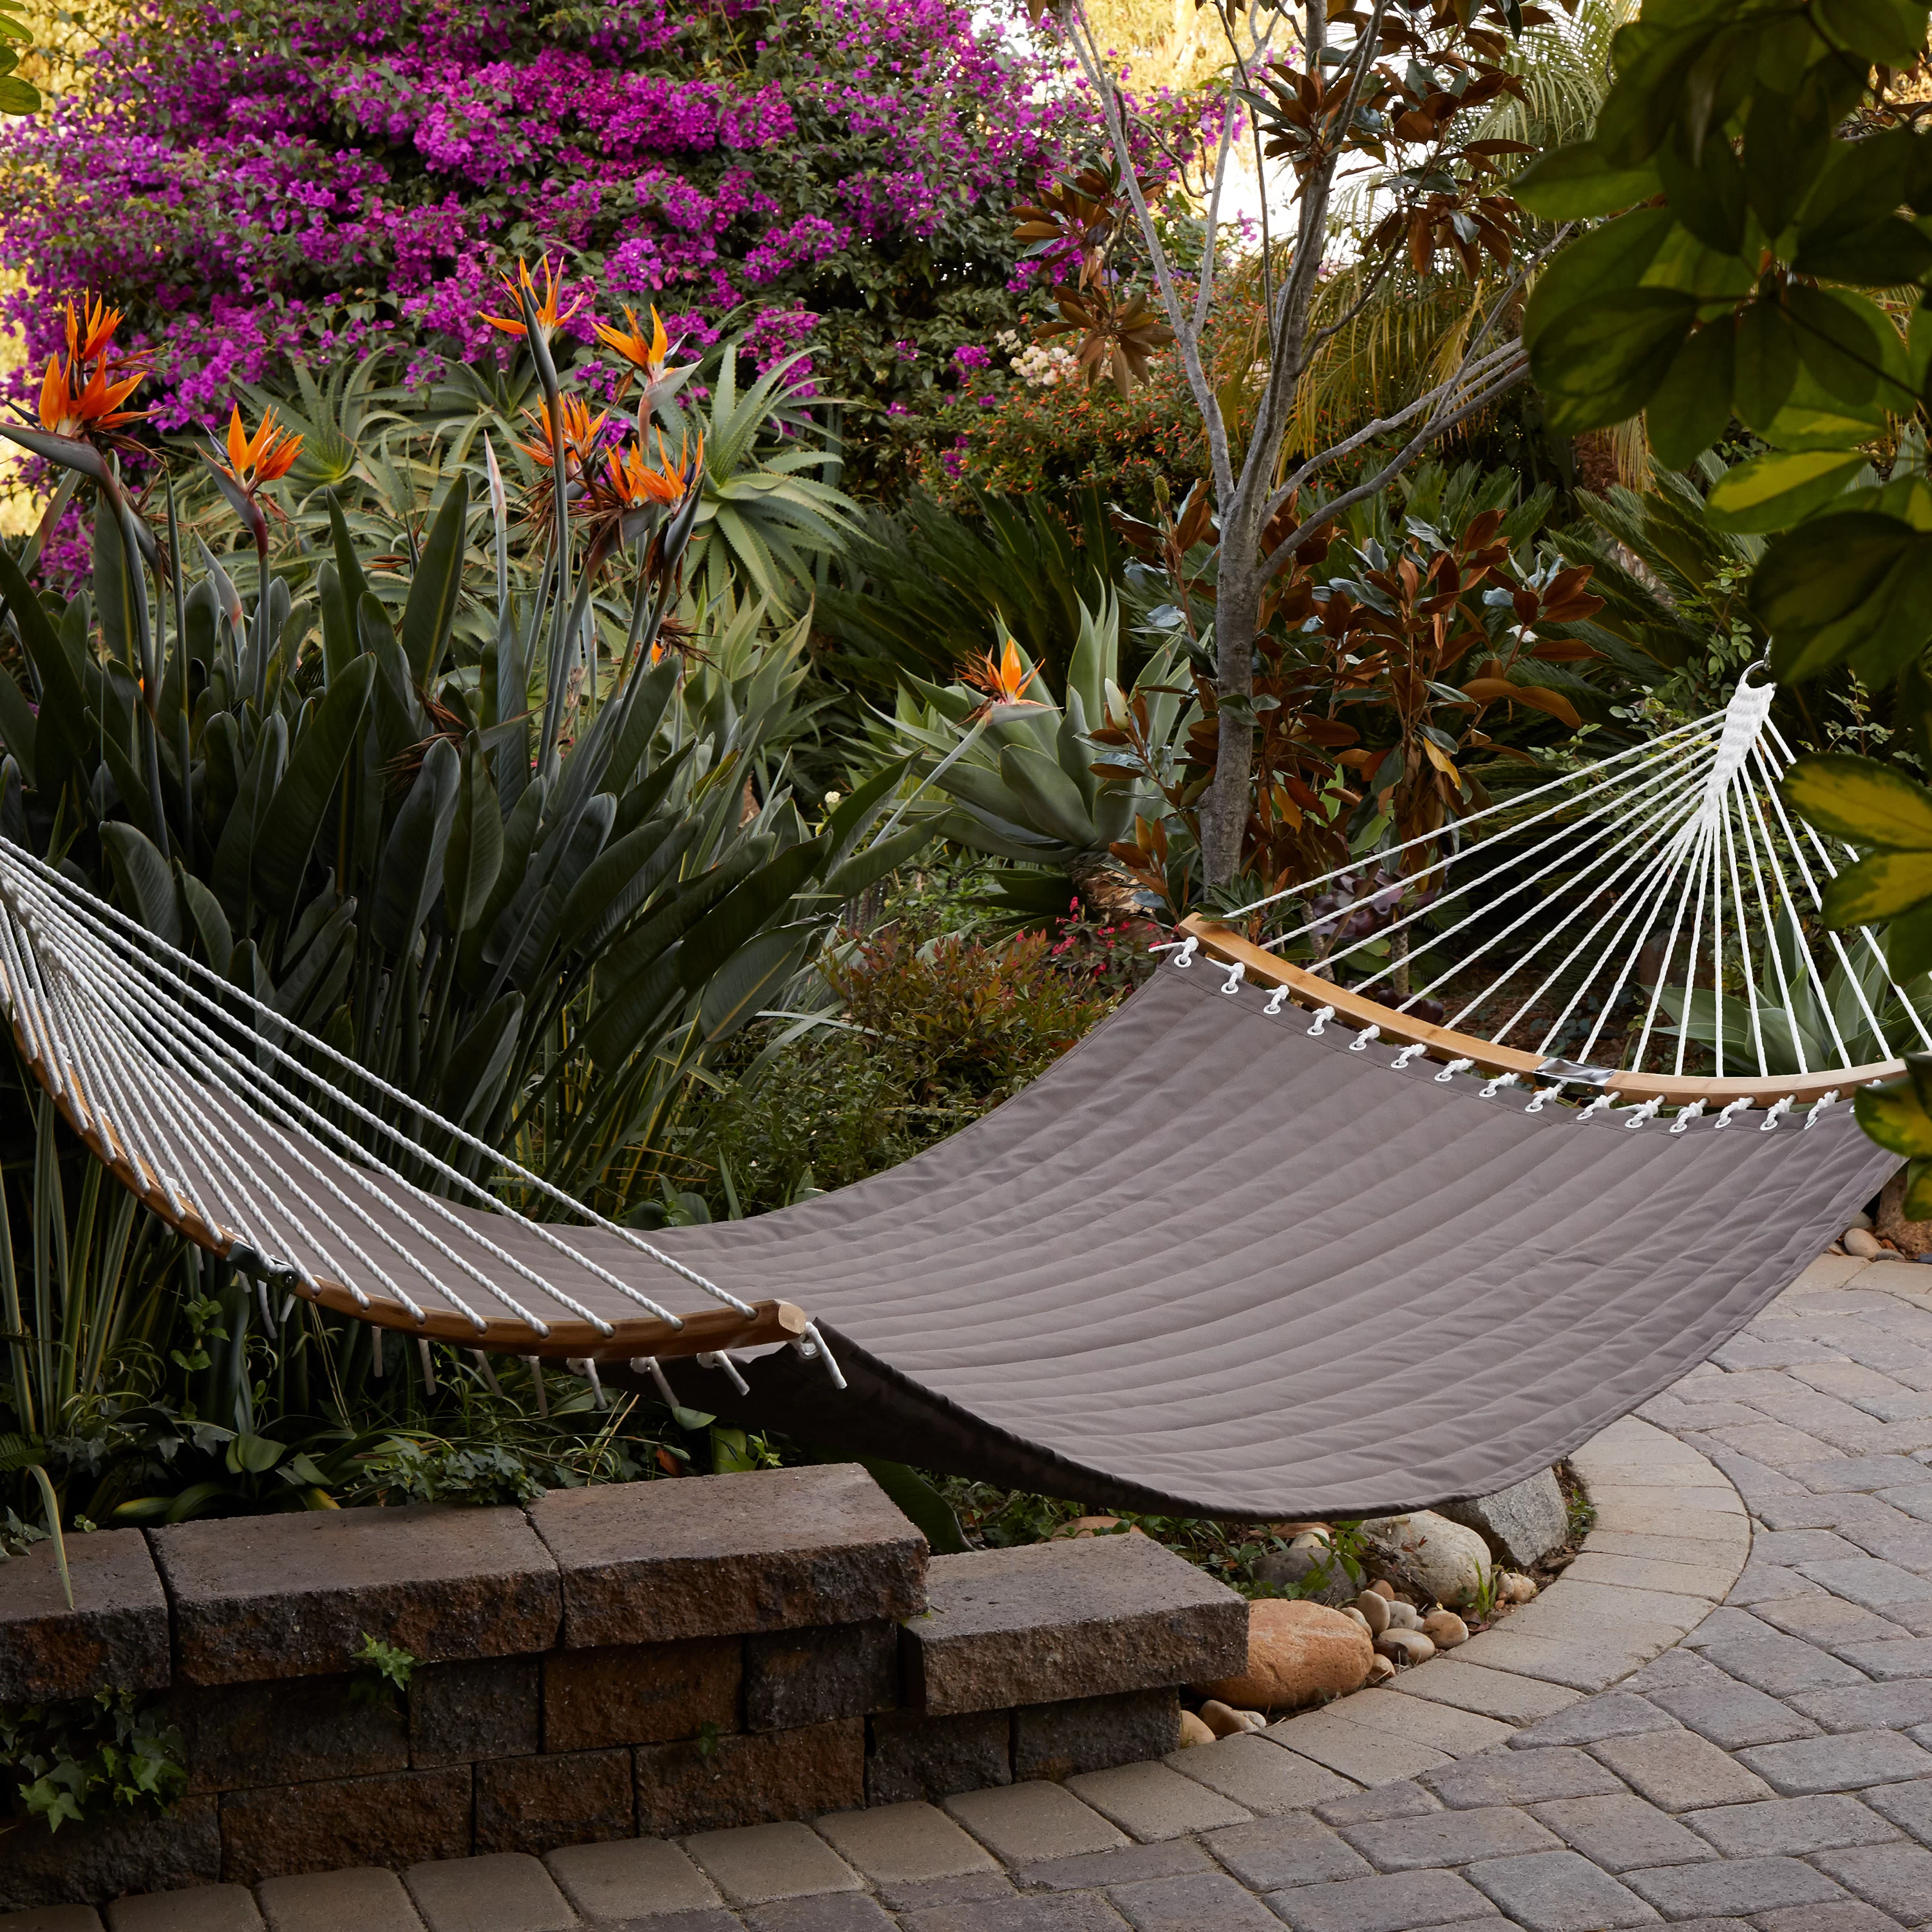 A hammock hanging over a paved pathway with tropical plants in the background.